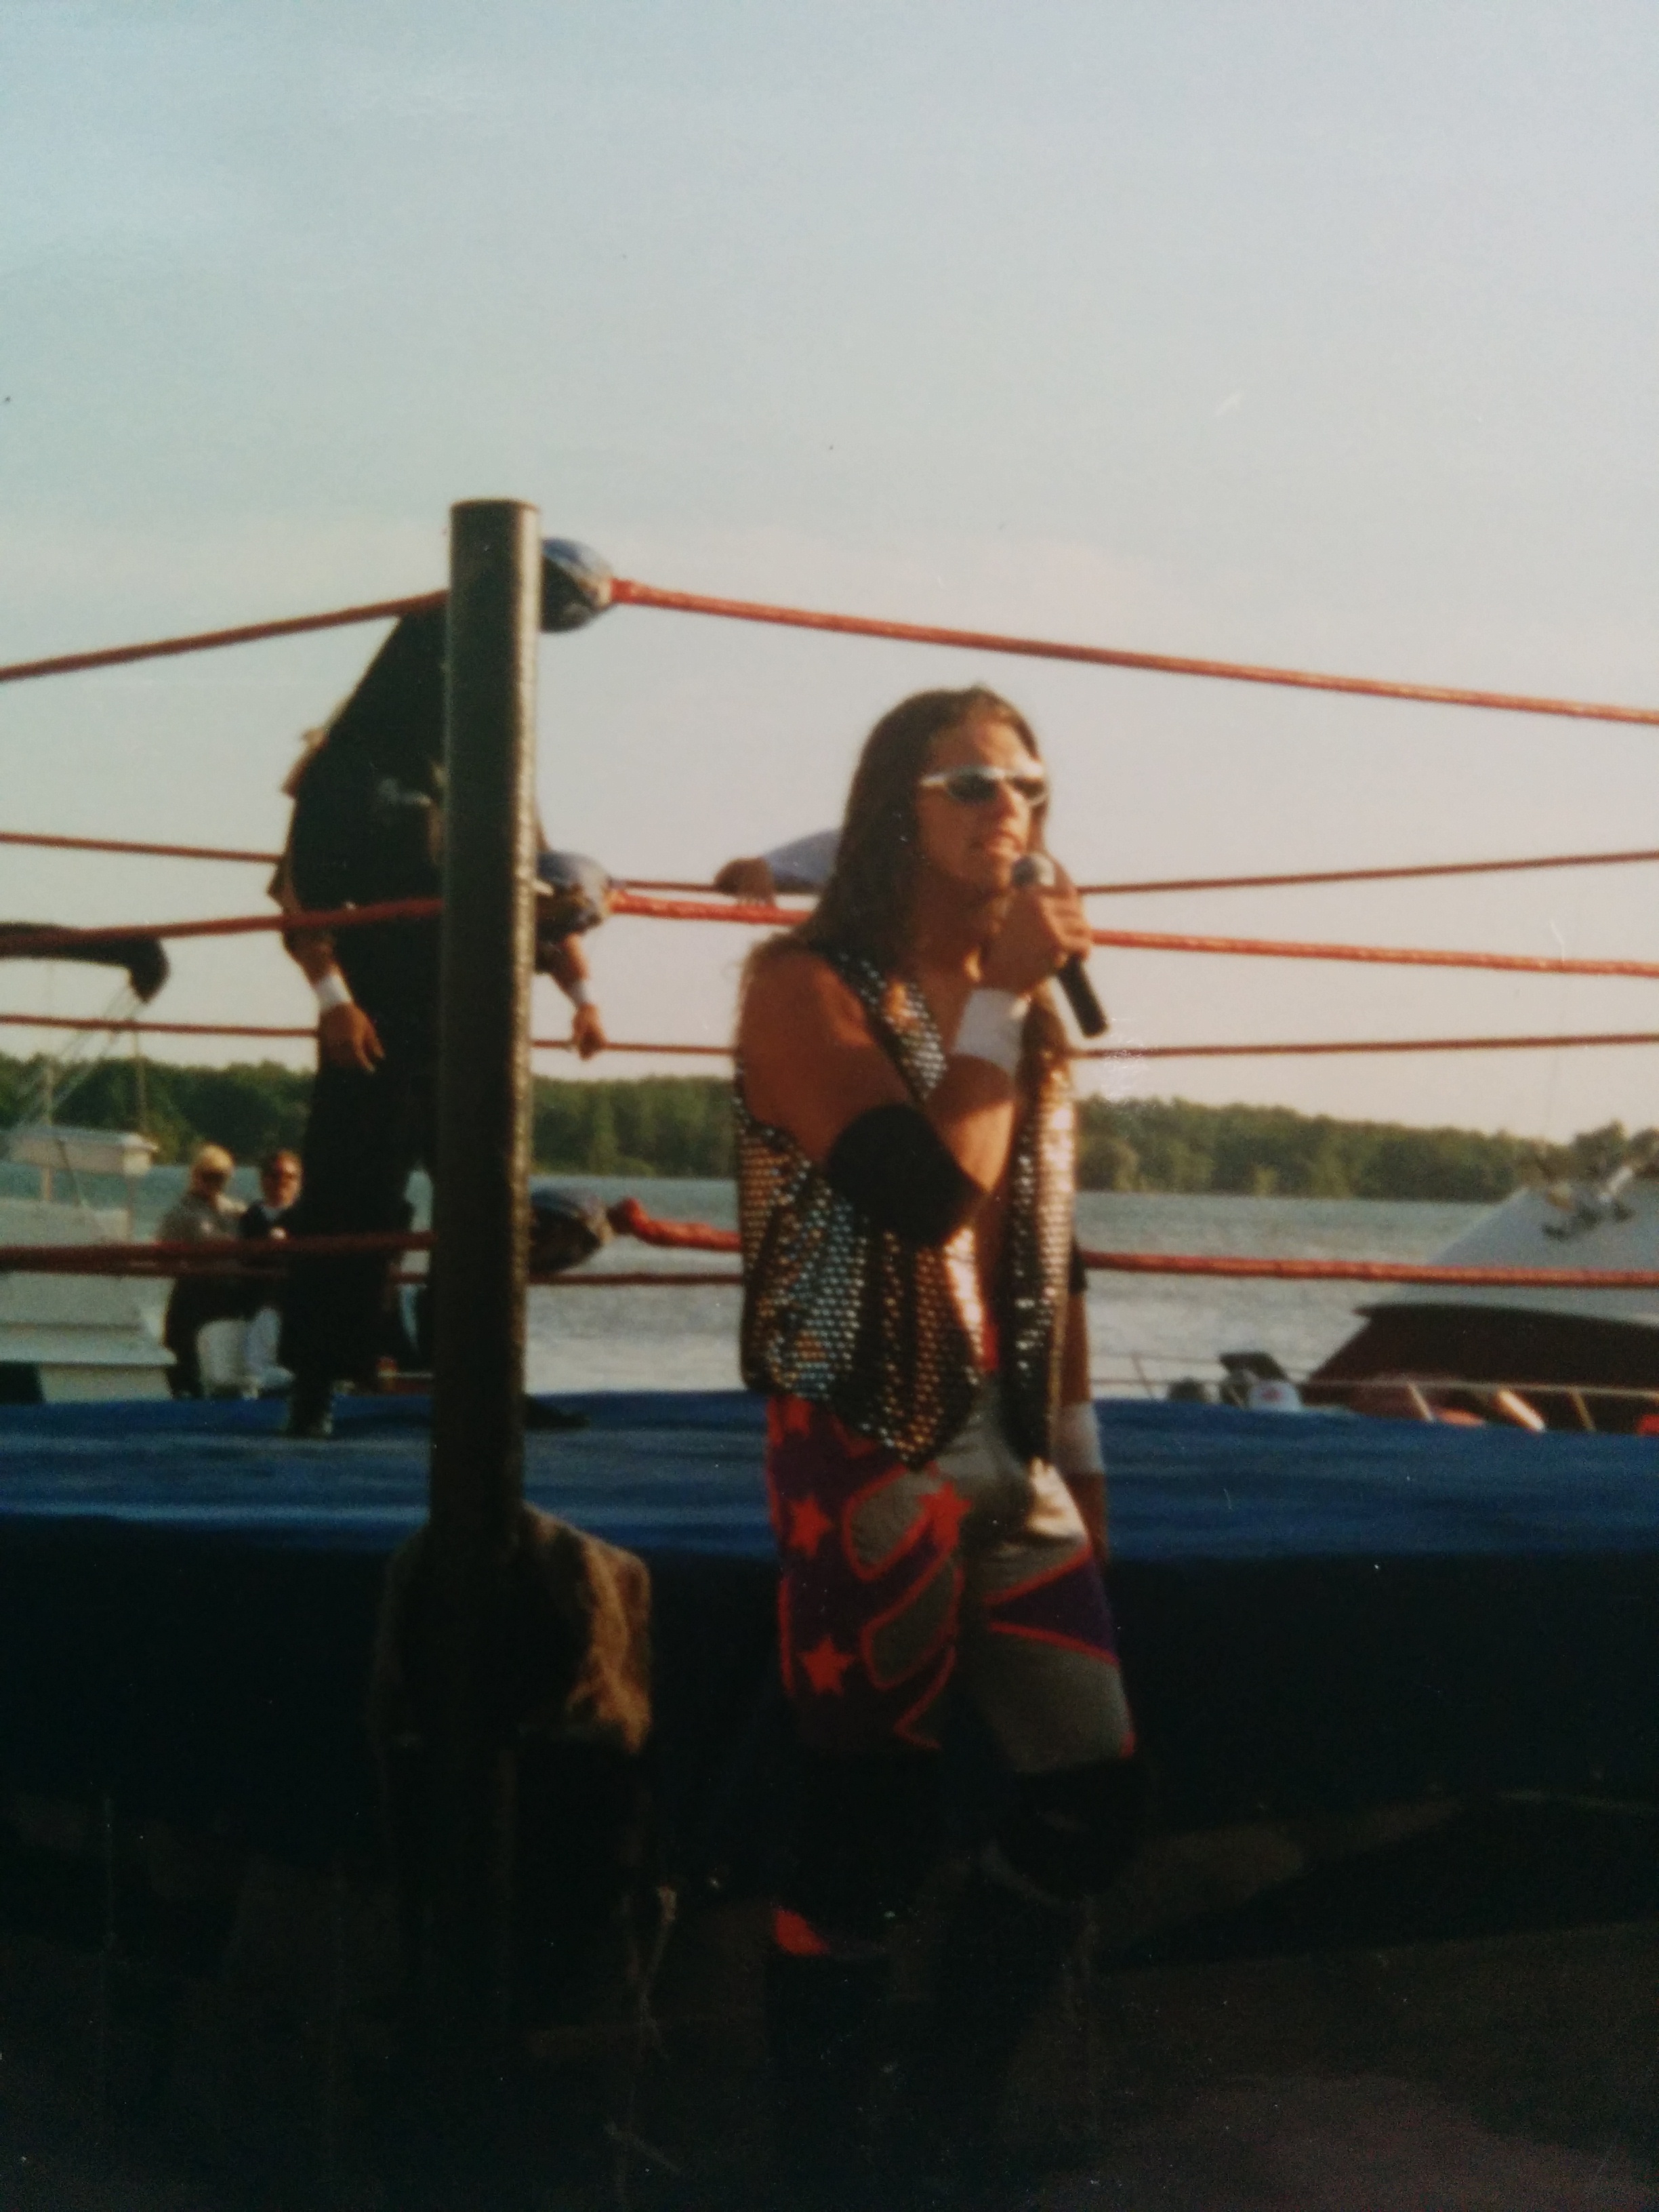 Long Lost Pictures From a Pro Wrestling Show I Promoted in 1997 with Edge, Christian, Johnny Swinger & Just Joe